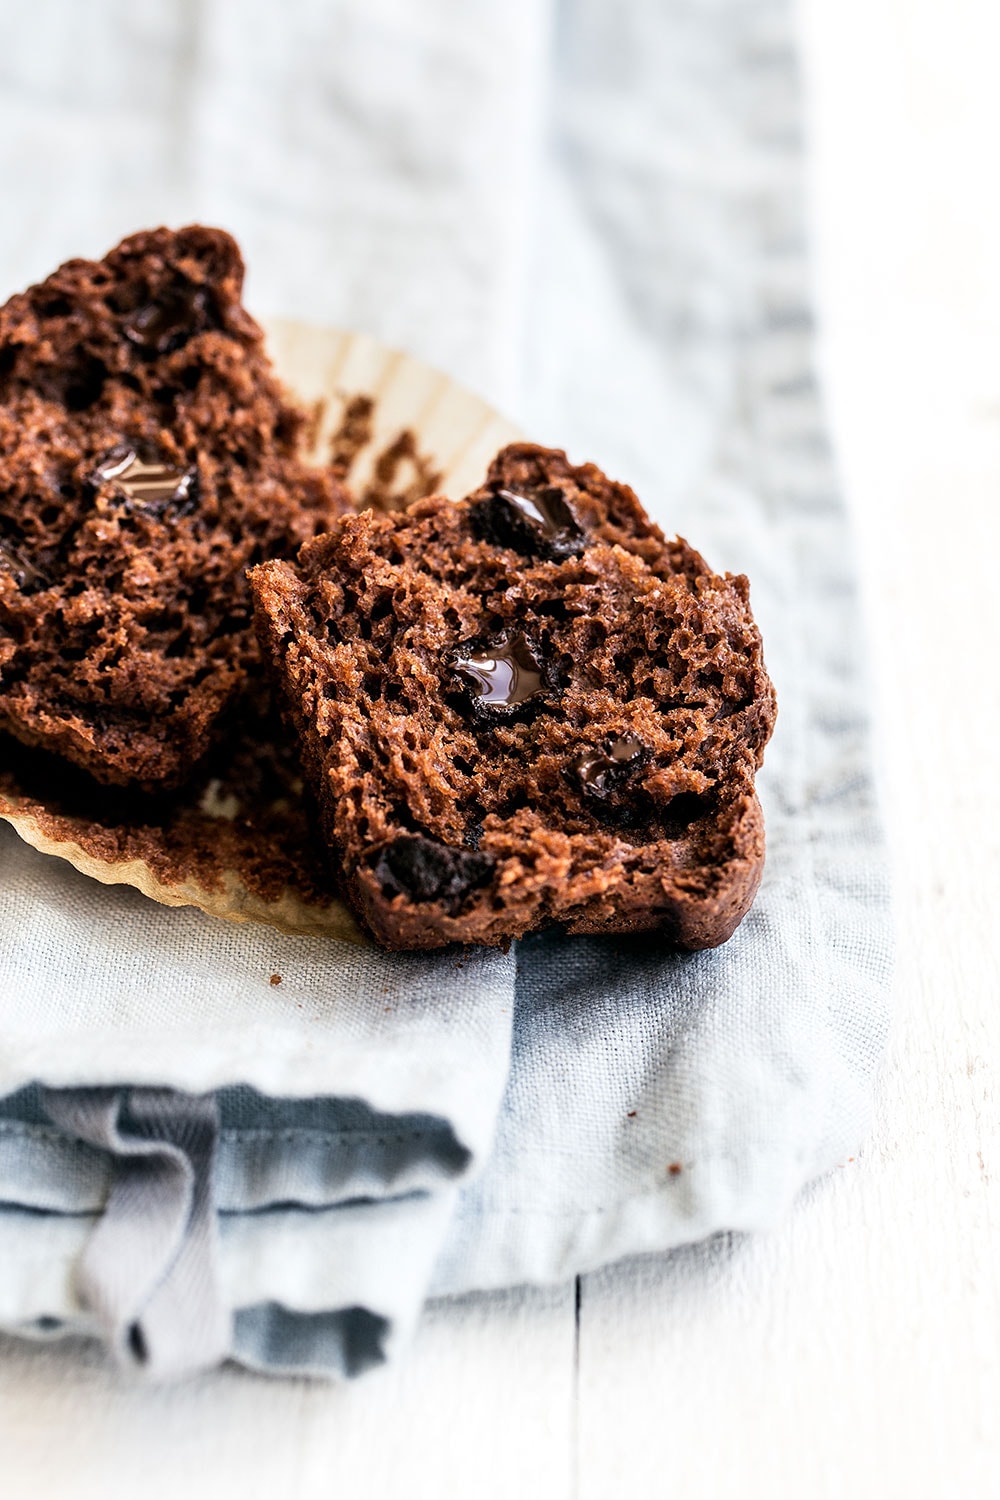 Moist and tender Double Chocolate Muffins feature a brown sugar cocoa muffin studded with gooey chocolate chunks for the ultimate easy treat!